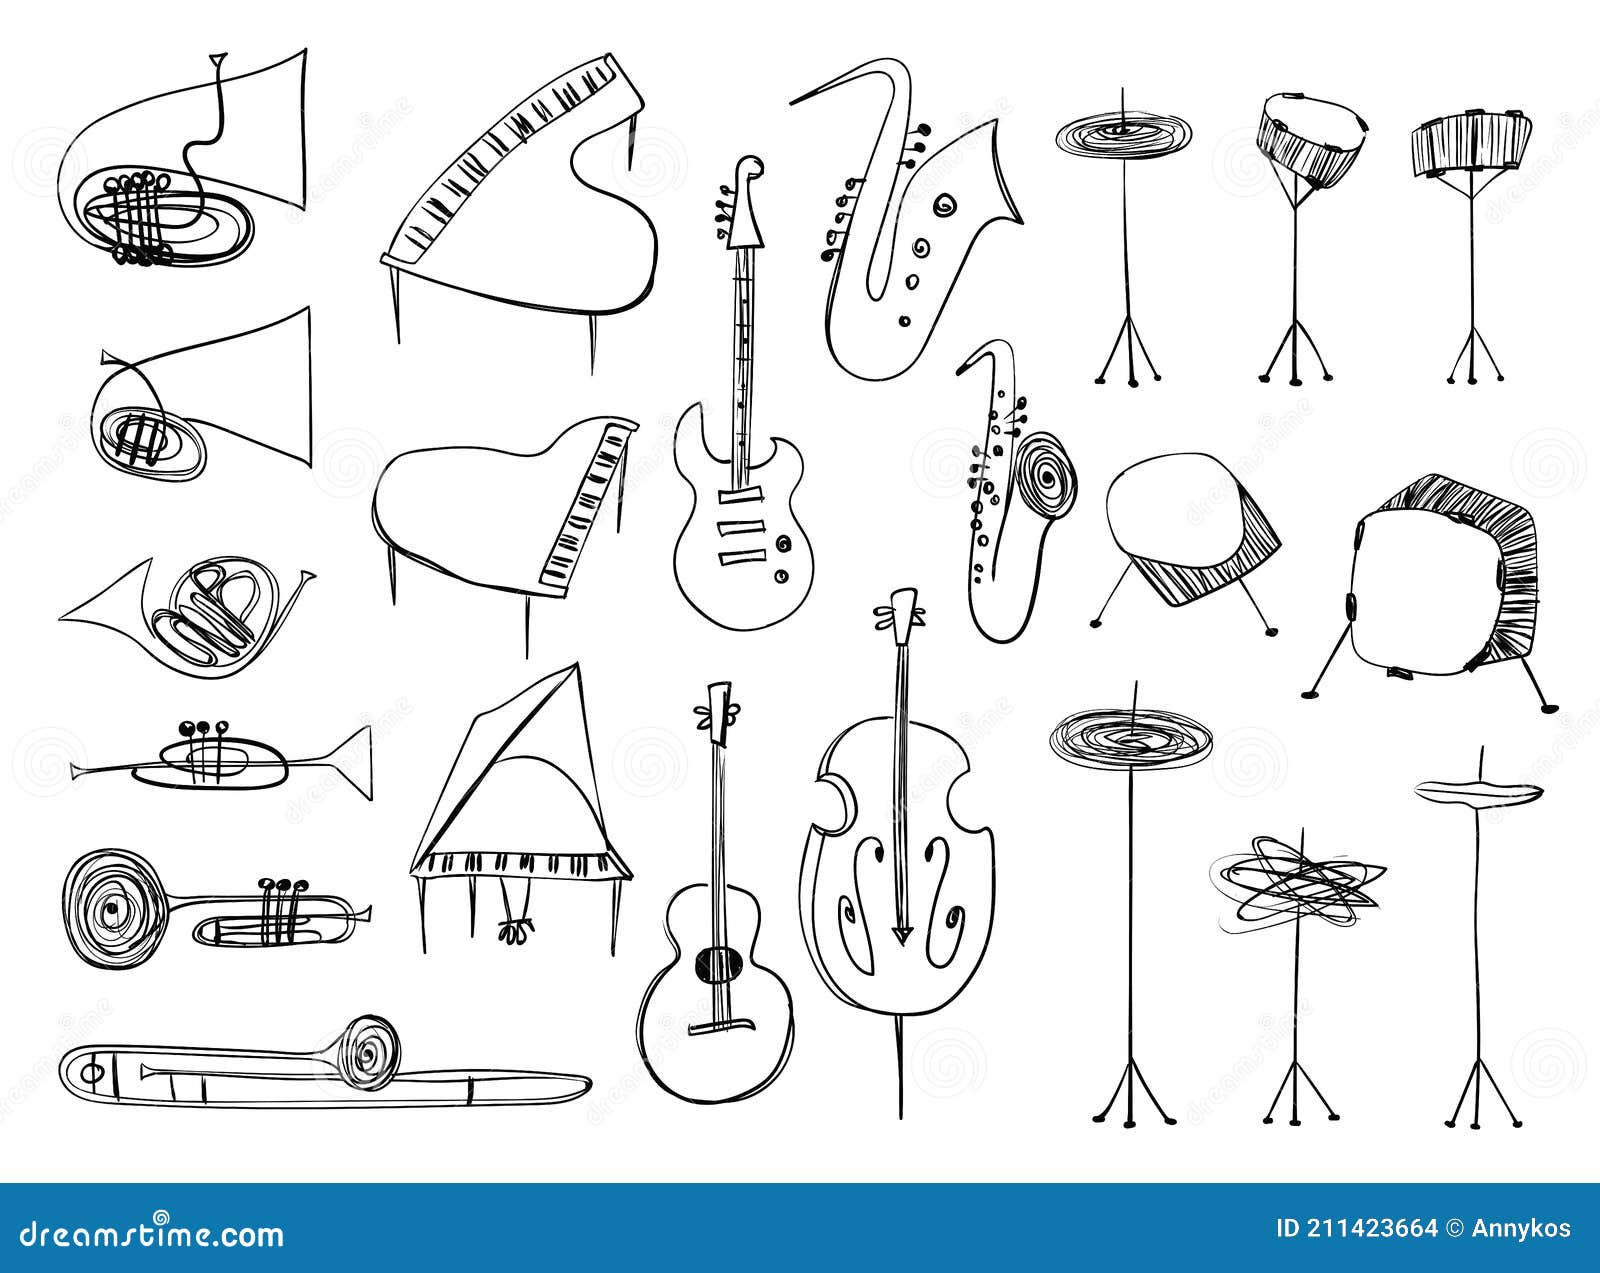 How to Draw a Violin - Musical Instruments Drawing - YouTube-vachngandaiphat.com.vn